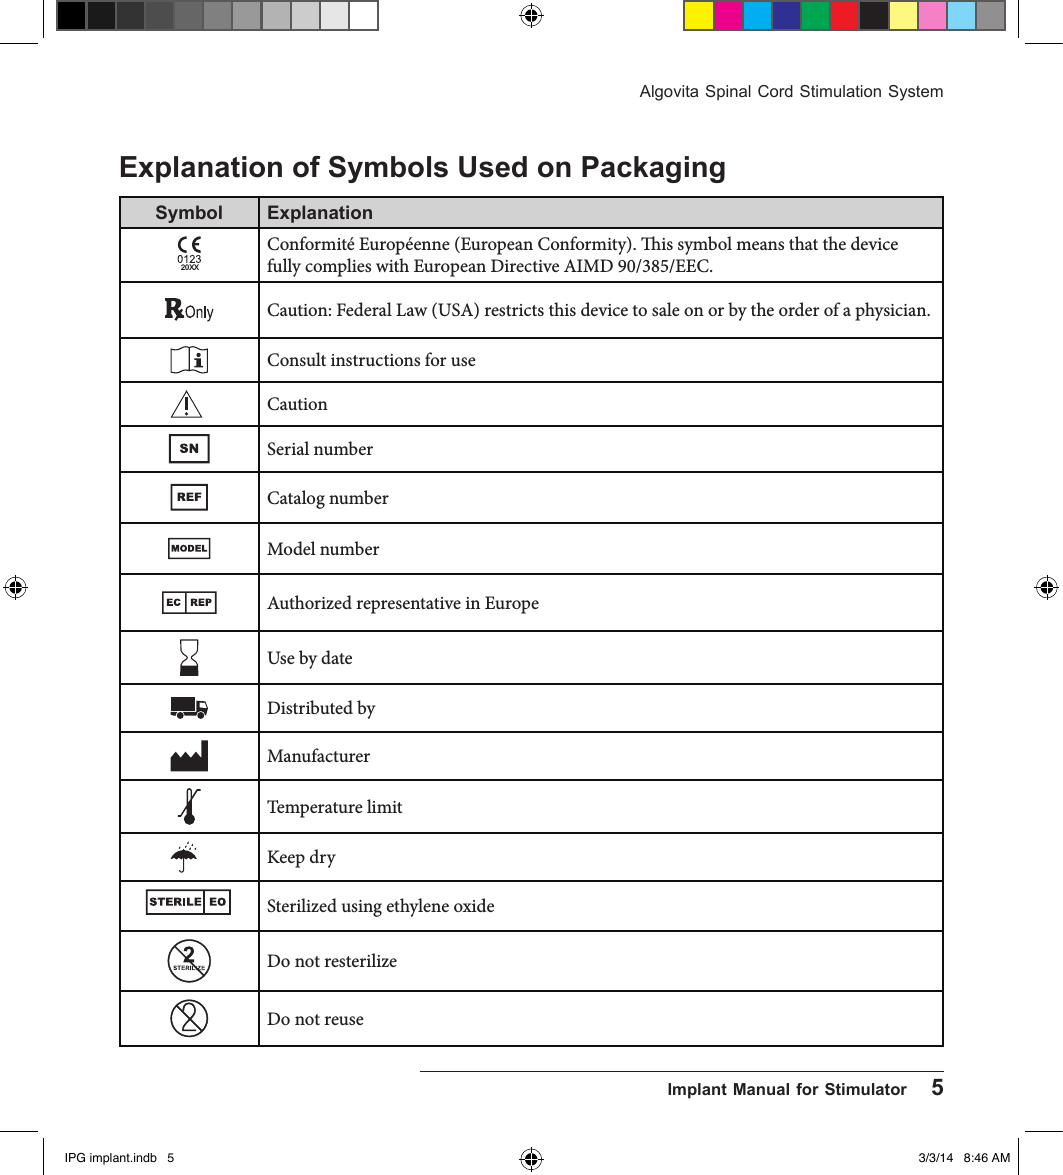 Algovita Spinal Cord Stimulation System  Implant Manual for Stimulator    5Explanation of Symbols Used on Packaging Symbol Explanation20XXConformité Européenne (European Conformity). is symbol means that the device fully complies with European Directive AIMD 90/385/EEC.Caution: Federal Law (USA) restricts this device to sale on or by the order of a physician.Consult instructions for useCautionSerial numberCatalog numberModel numberAuthorized representative in EuropeUse by dateDistributed byManufacturerTemperature limitKeep drySterilized using ethylene oxideDo not resterilizeDo not reuseIPG implant.indb   5 3/3/14   8:46 AM